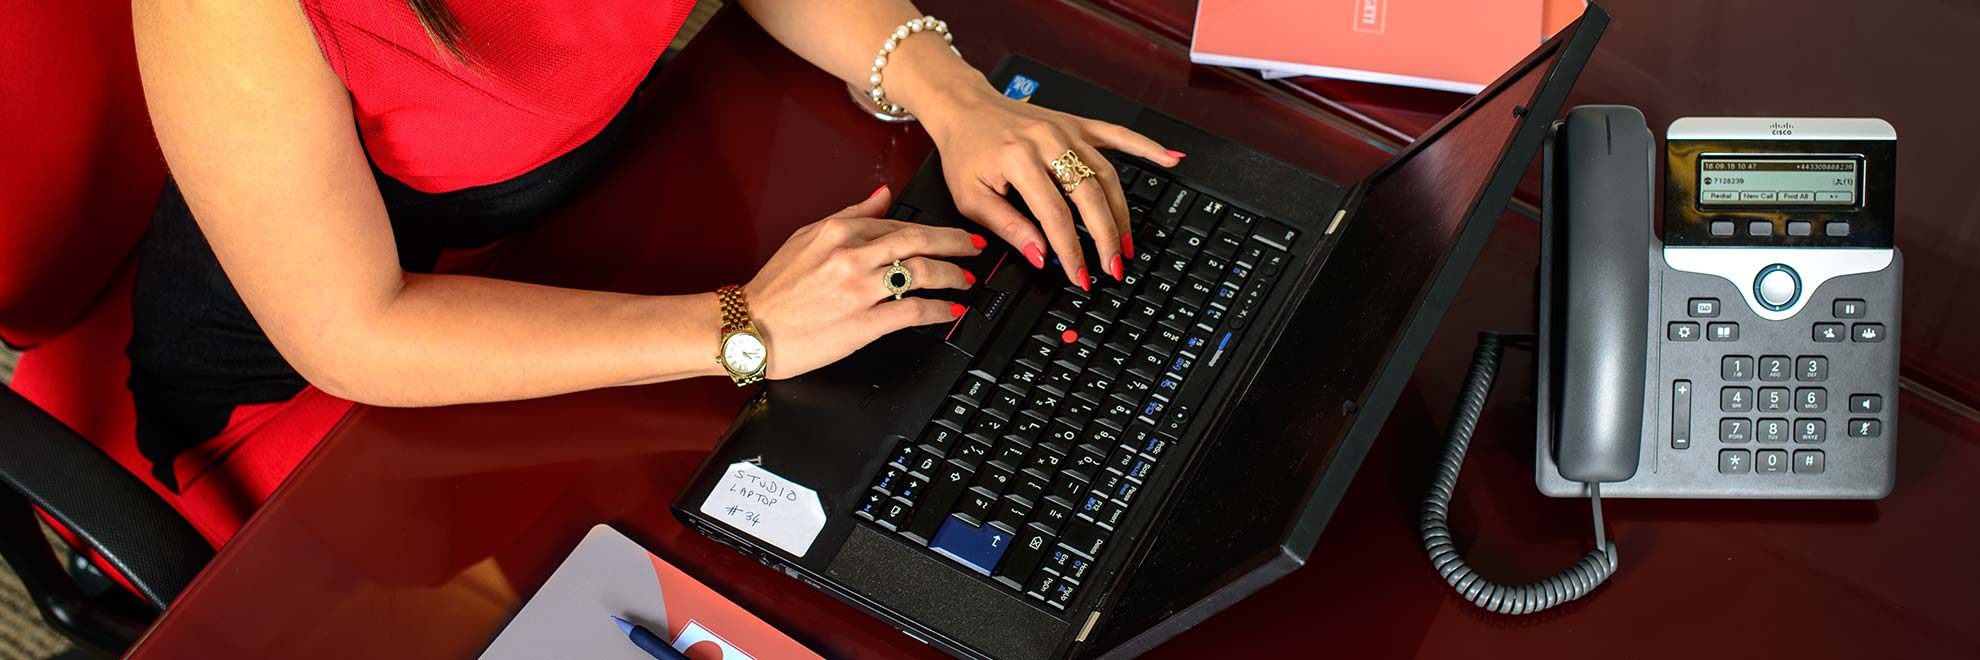 woman working with computer